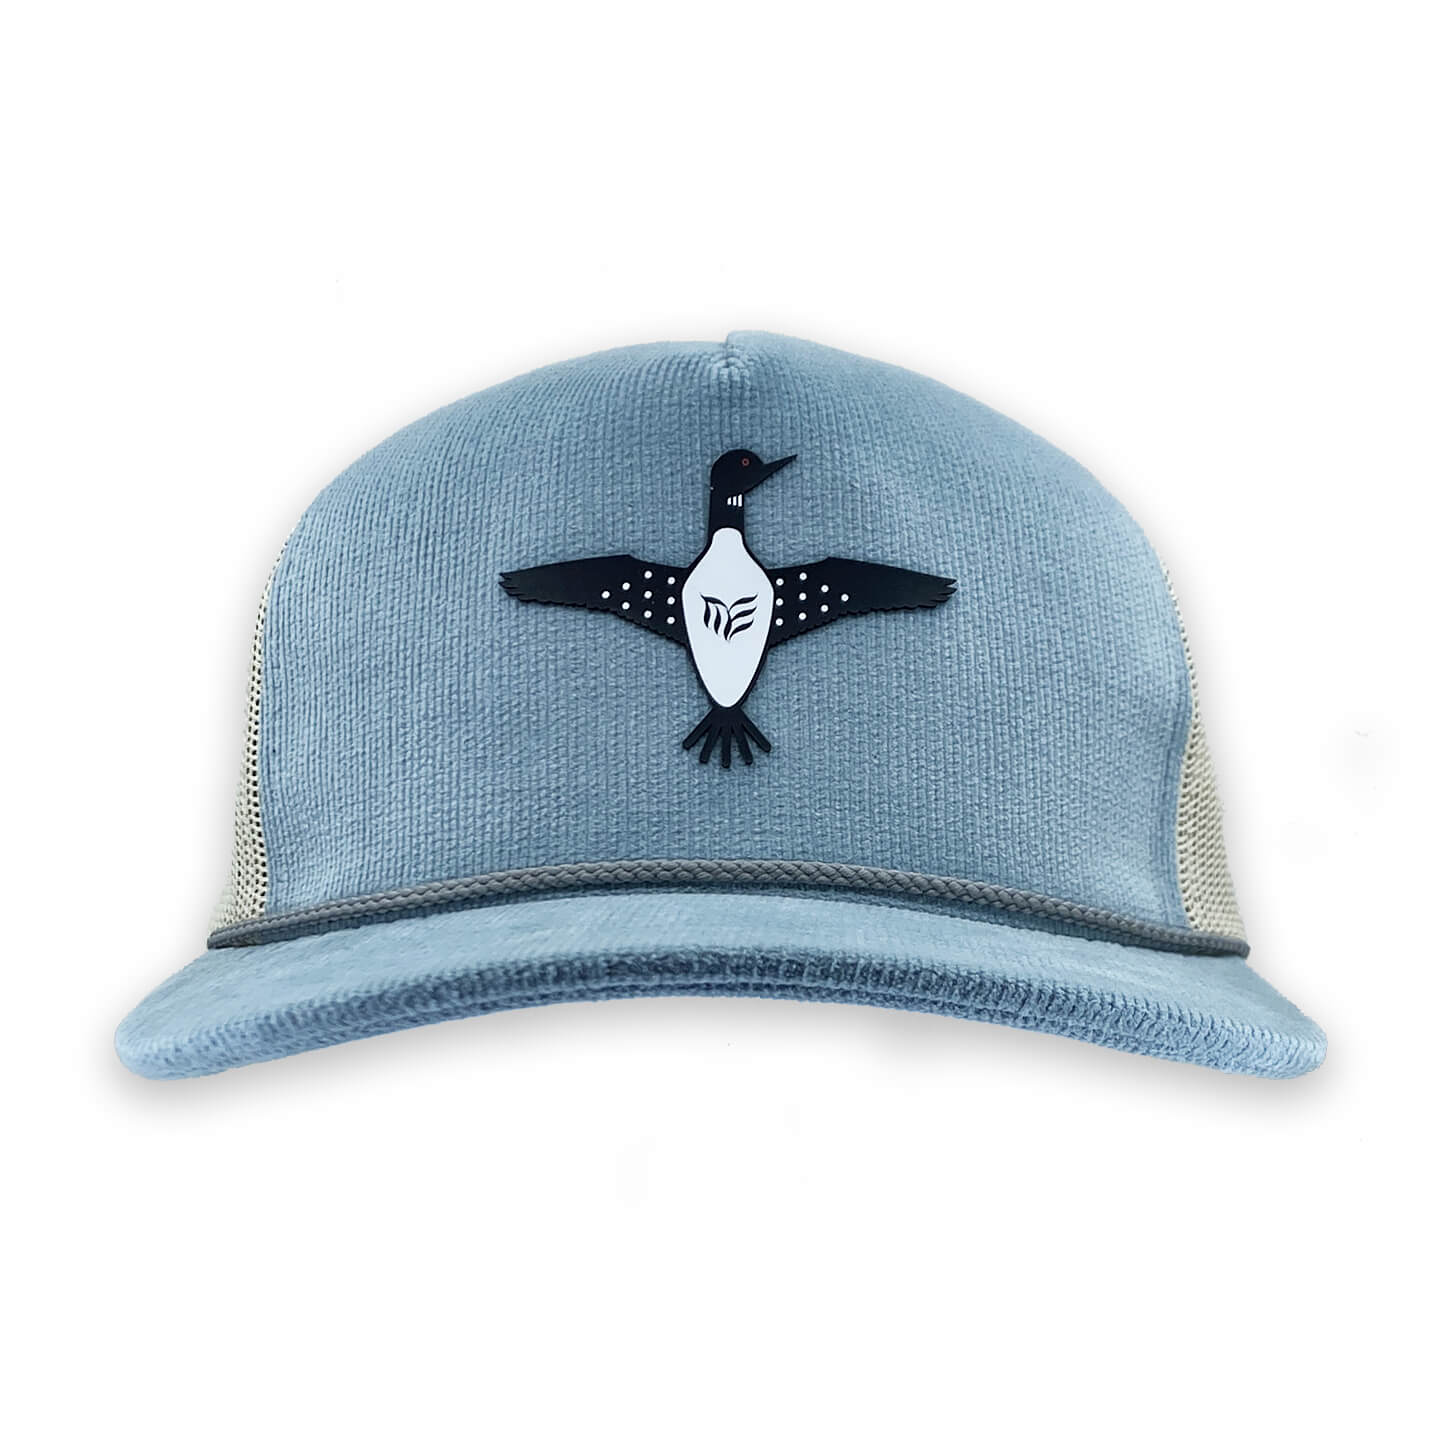 Corduroy 5 panel trucker hat with Loon patch front view